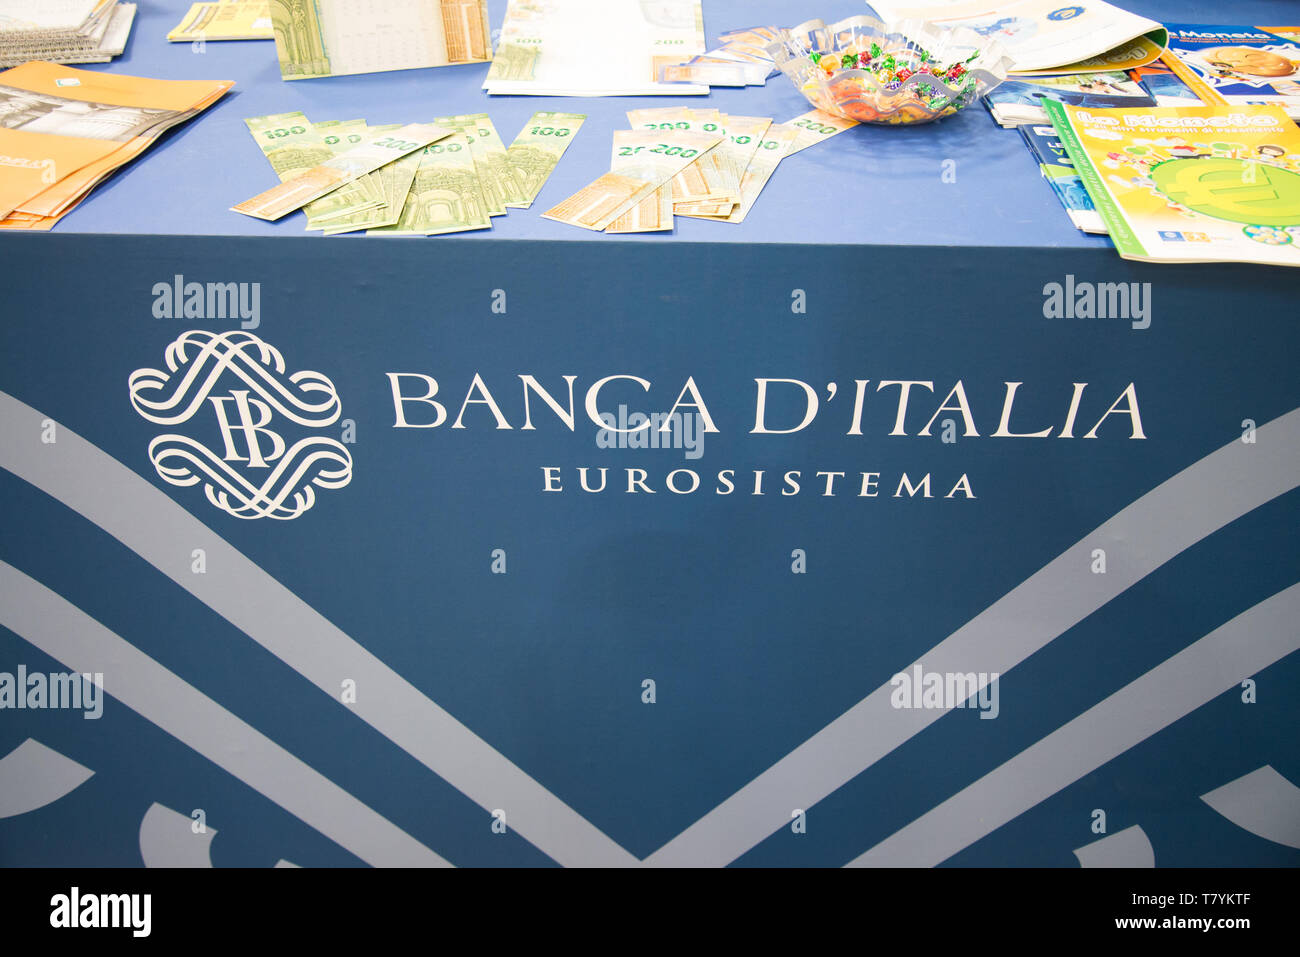 Banca d'italia sign and logo seen during the 32nd edition of the TFair. The International Book Fair is the most important Italian event in the publishing field. It takes place at the Lingotto Fiere conference center in Turin once a year, in the month of May. Stock Photo